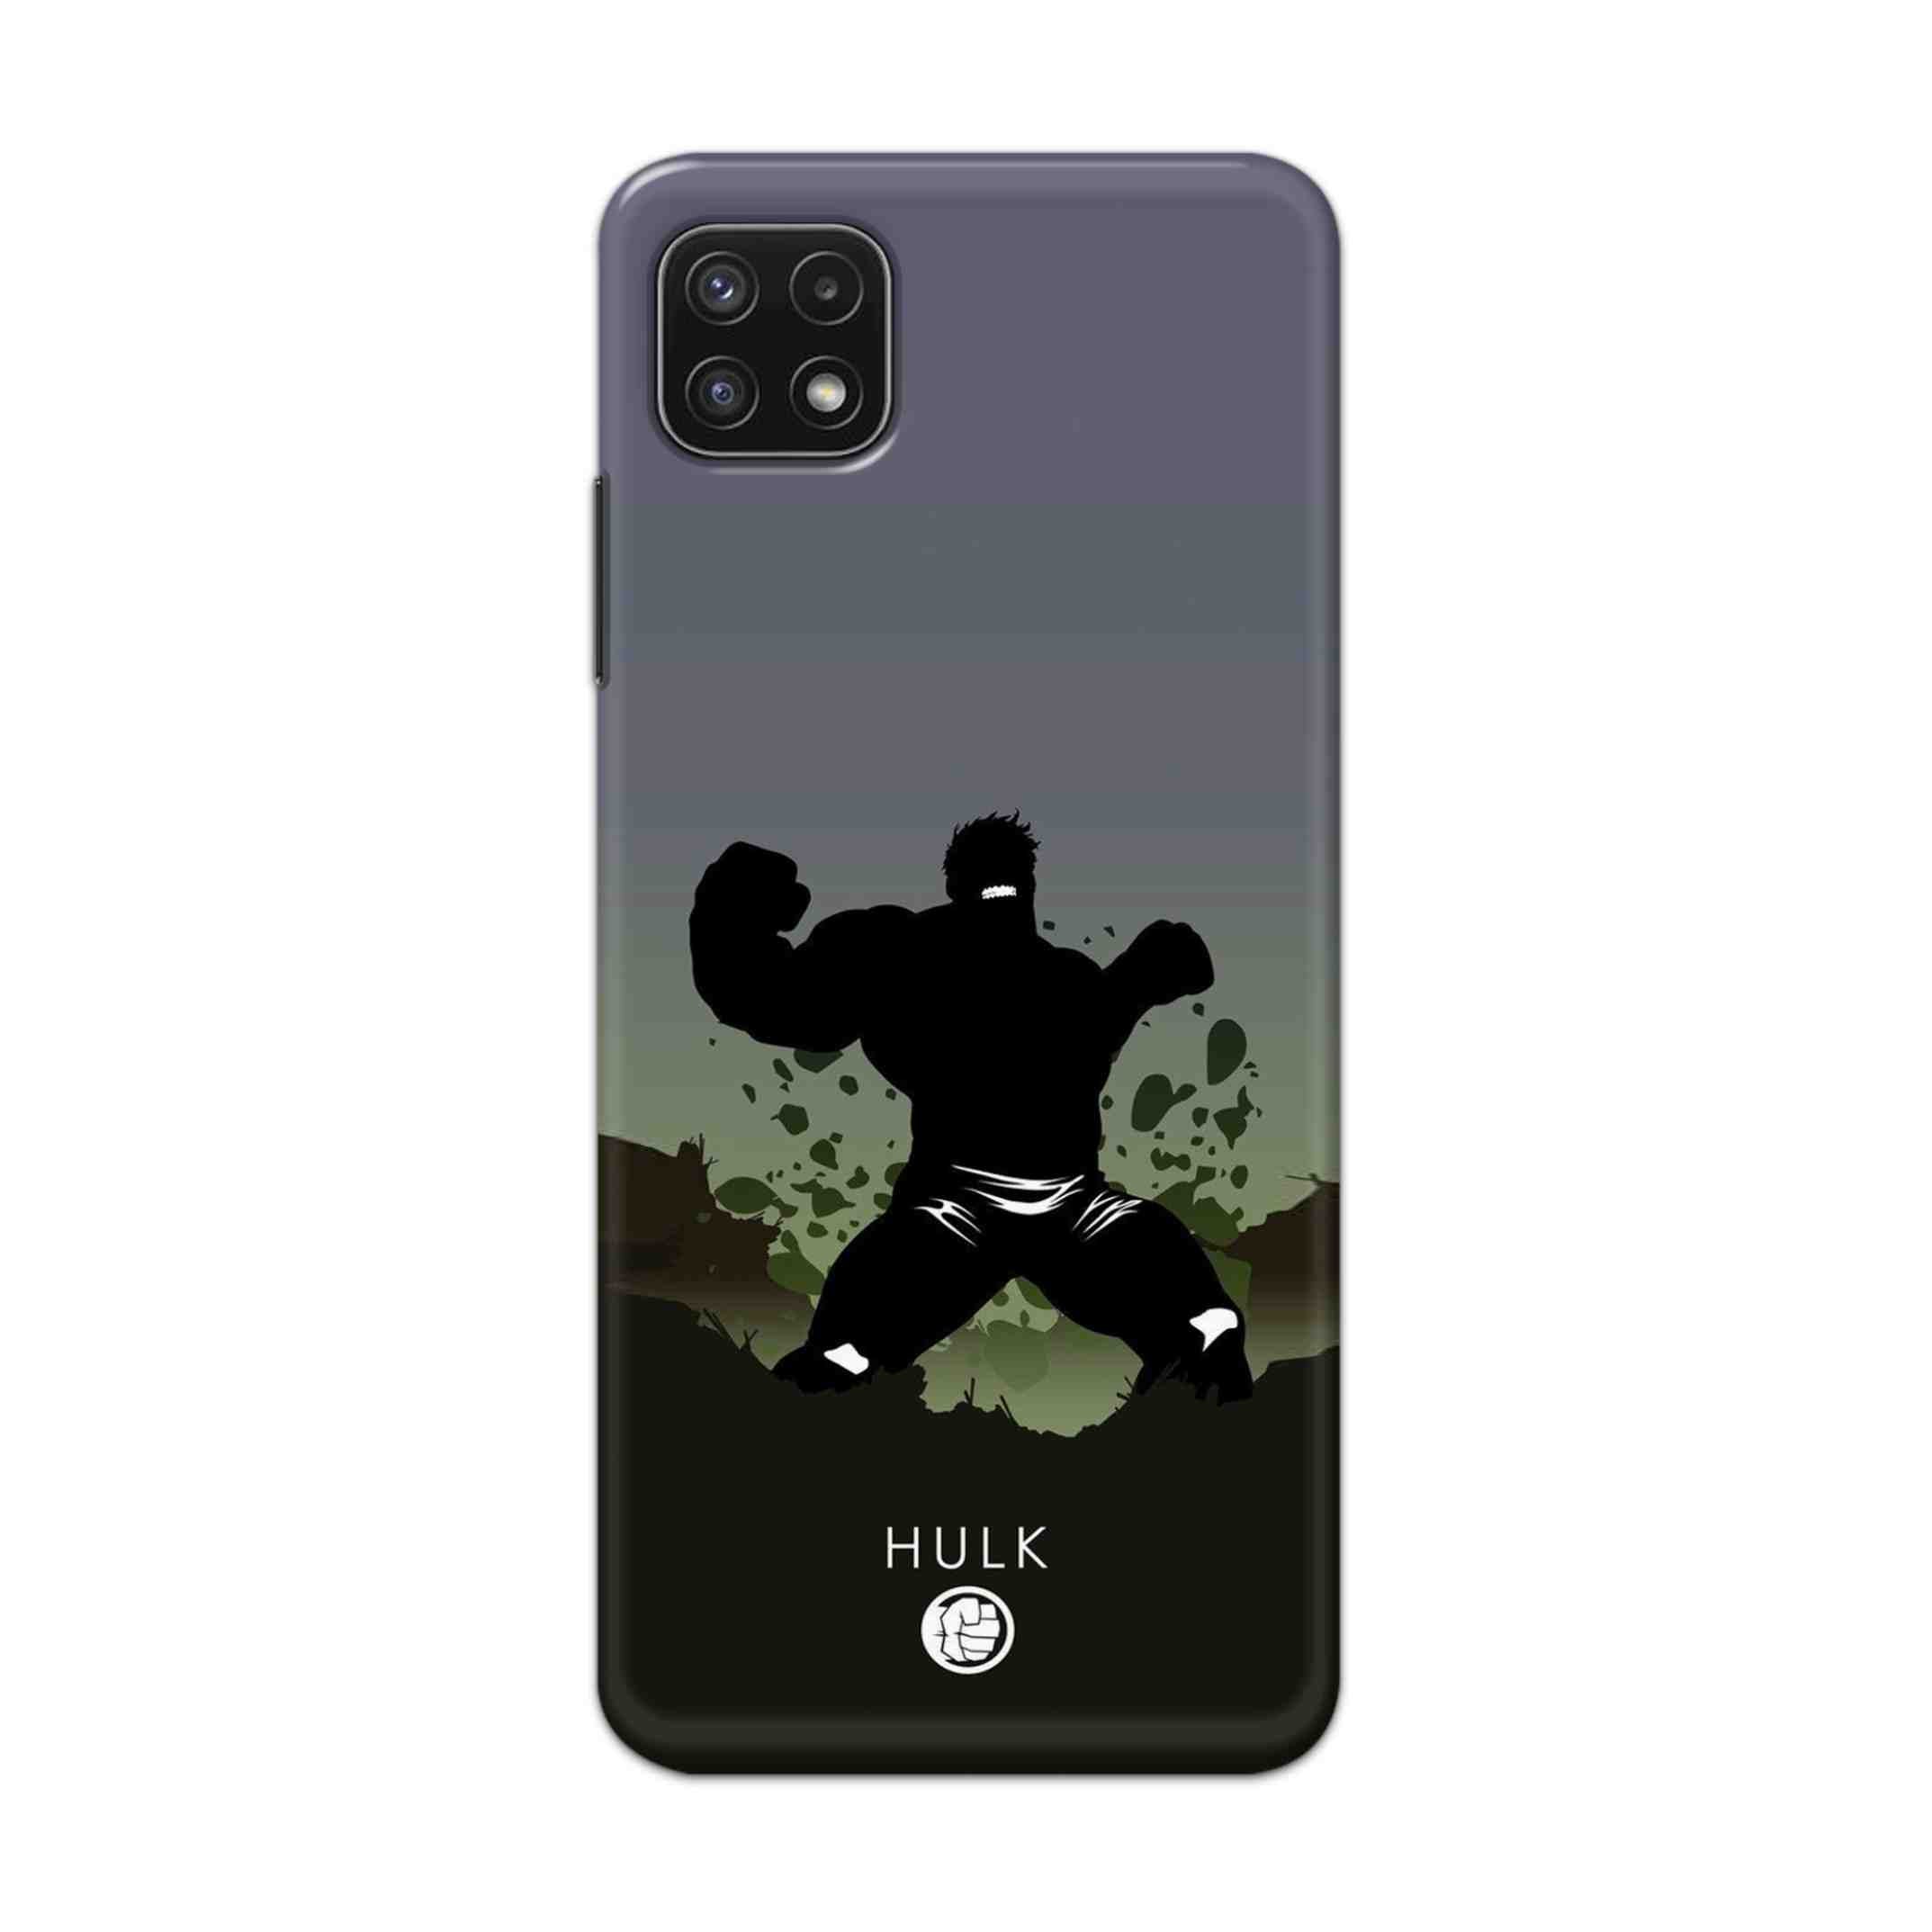 Buy Hulk Drax Hard Back Mobile Phone Case Cover For Samsung A22 5G Online